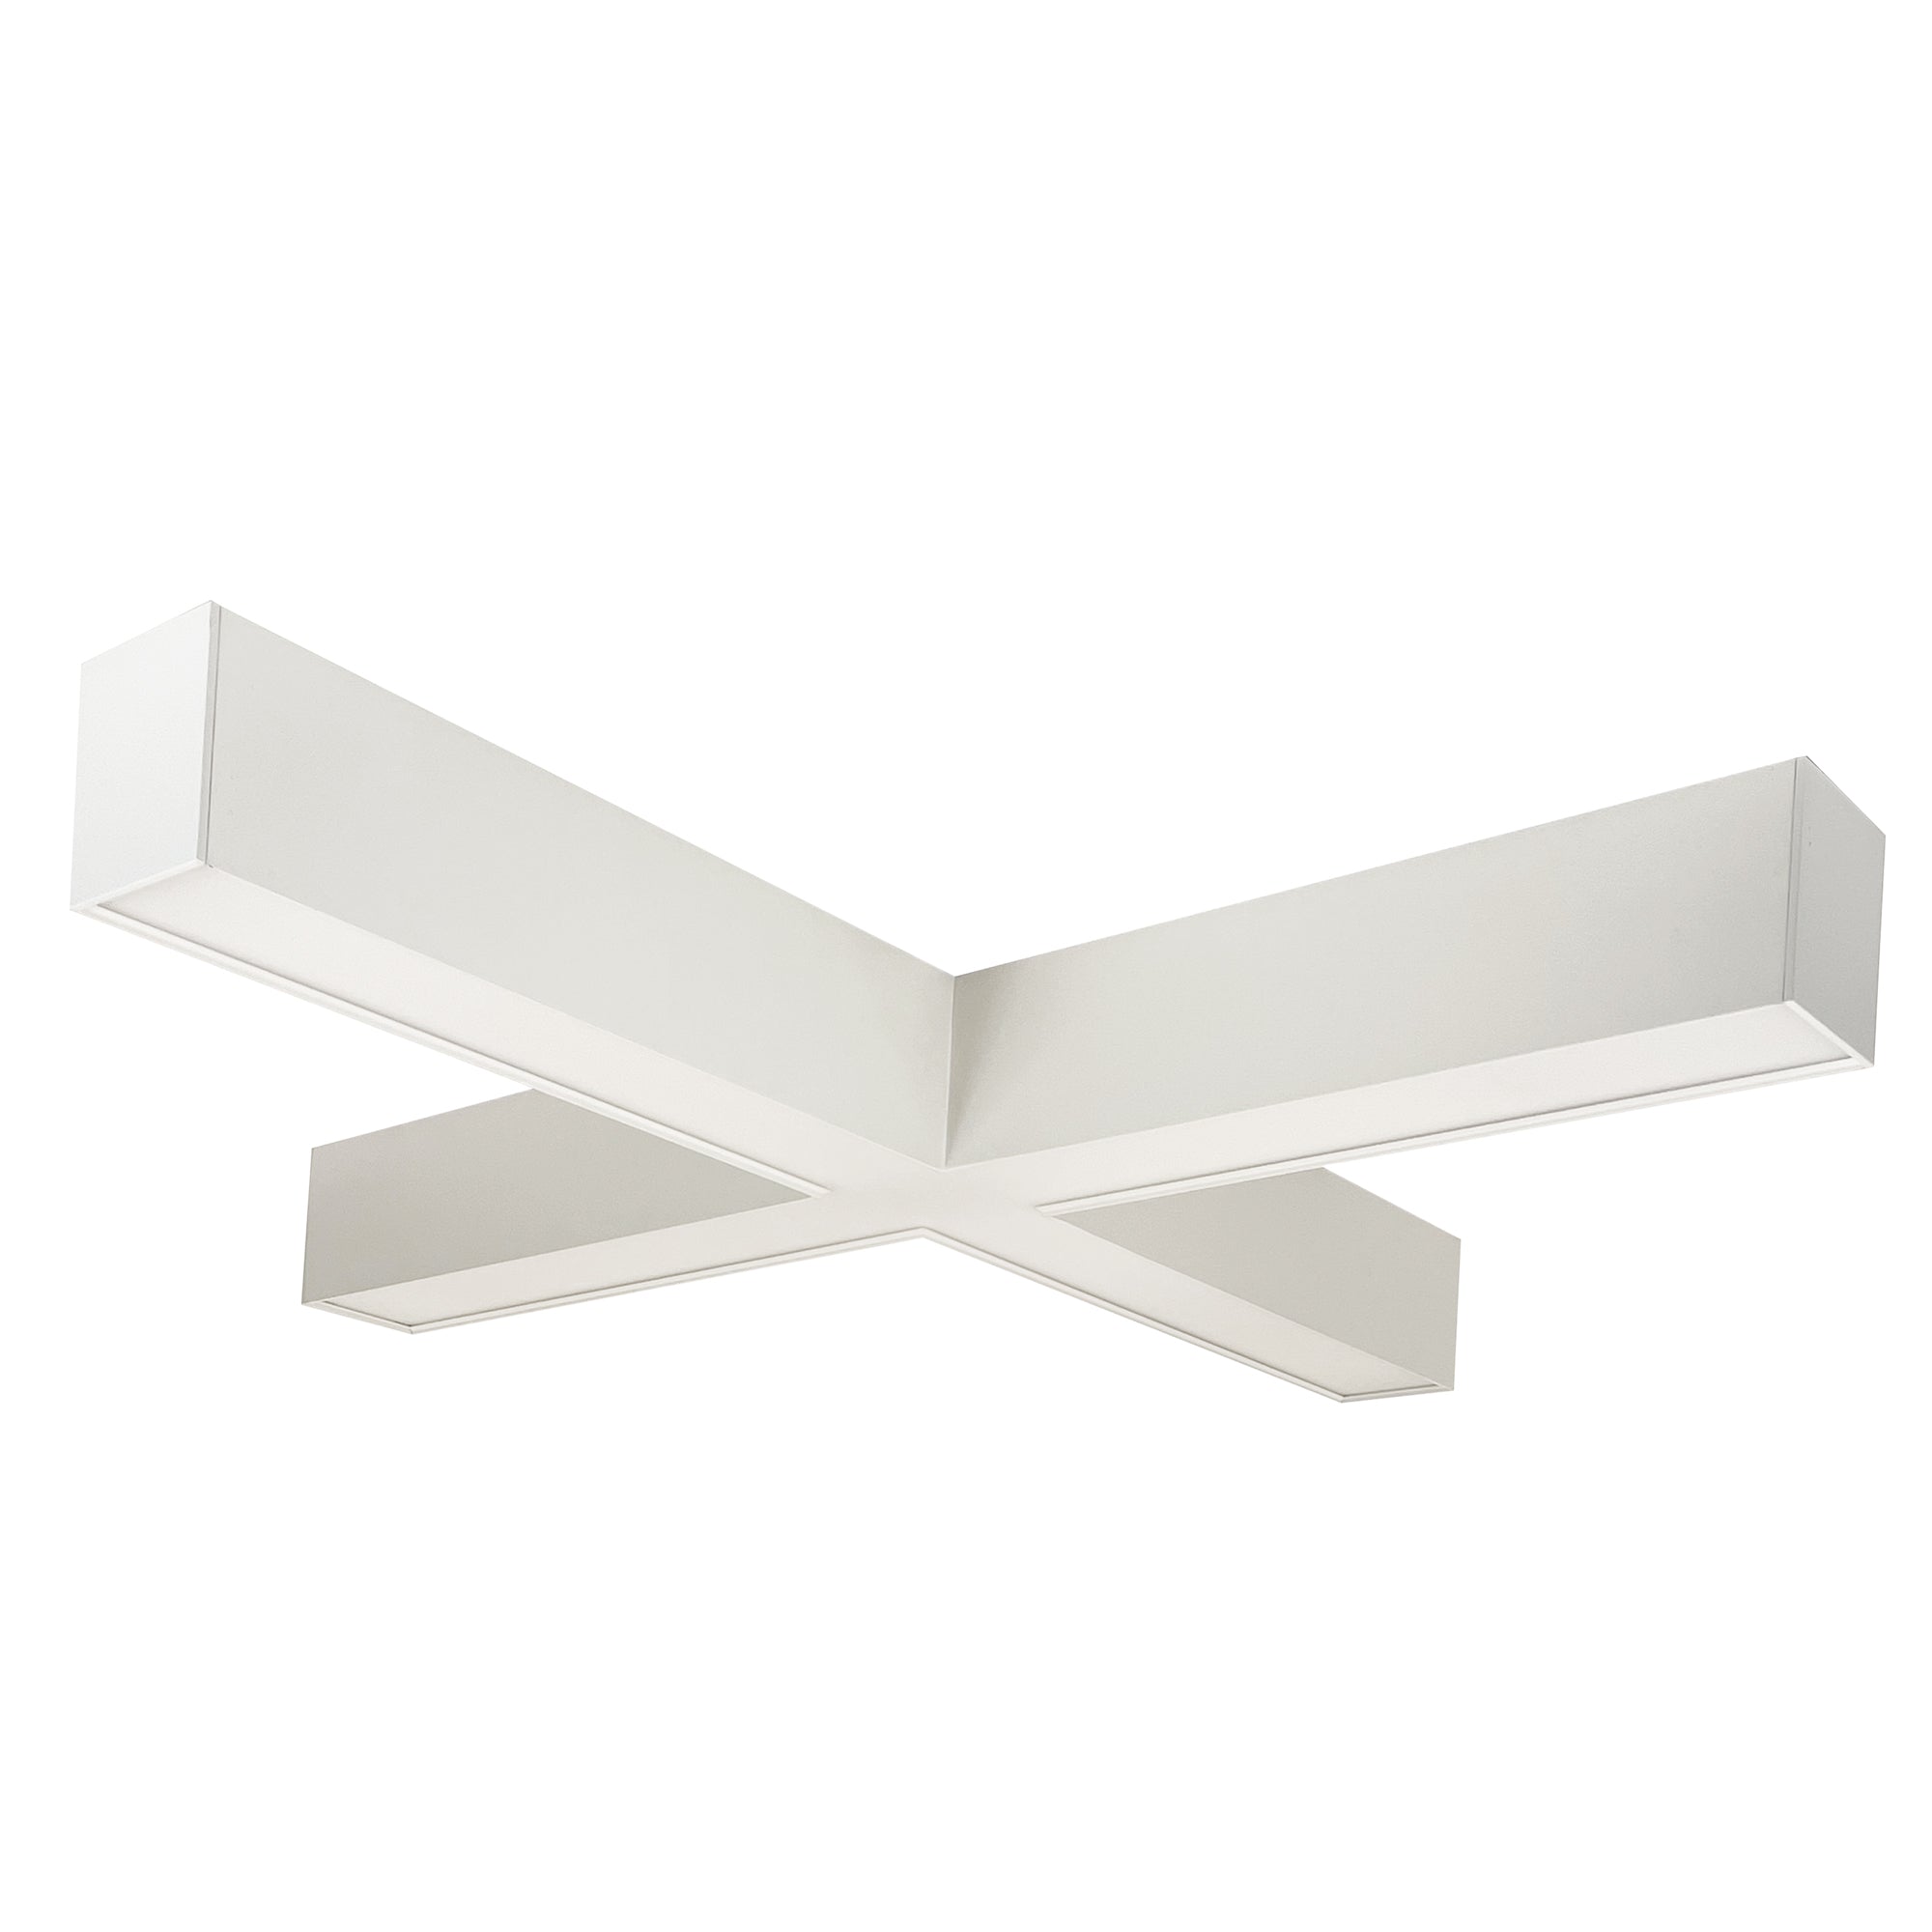 Nora Lighting NLUD-X334W - Linear -  InchX Inch Shaped L-Line LED Indirect/Direct Linear, 6028lm / Selectable CCT, White finish